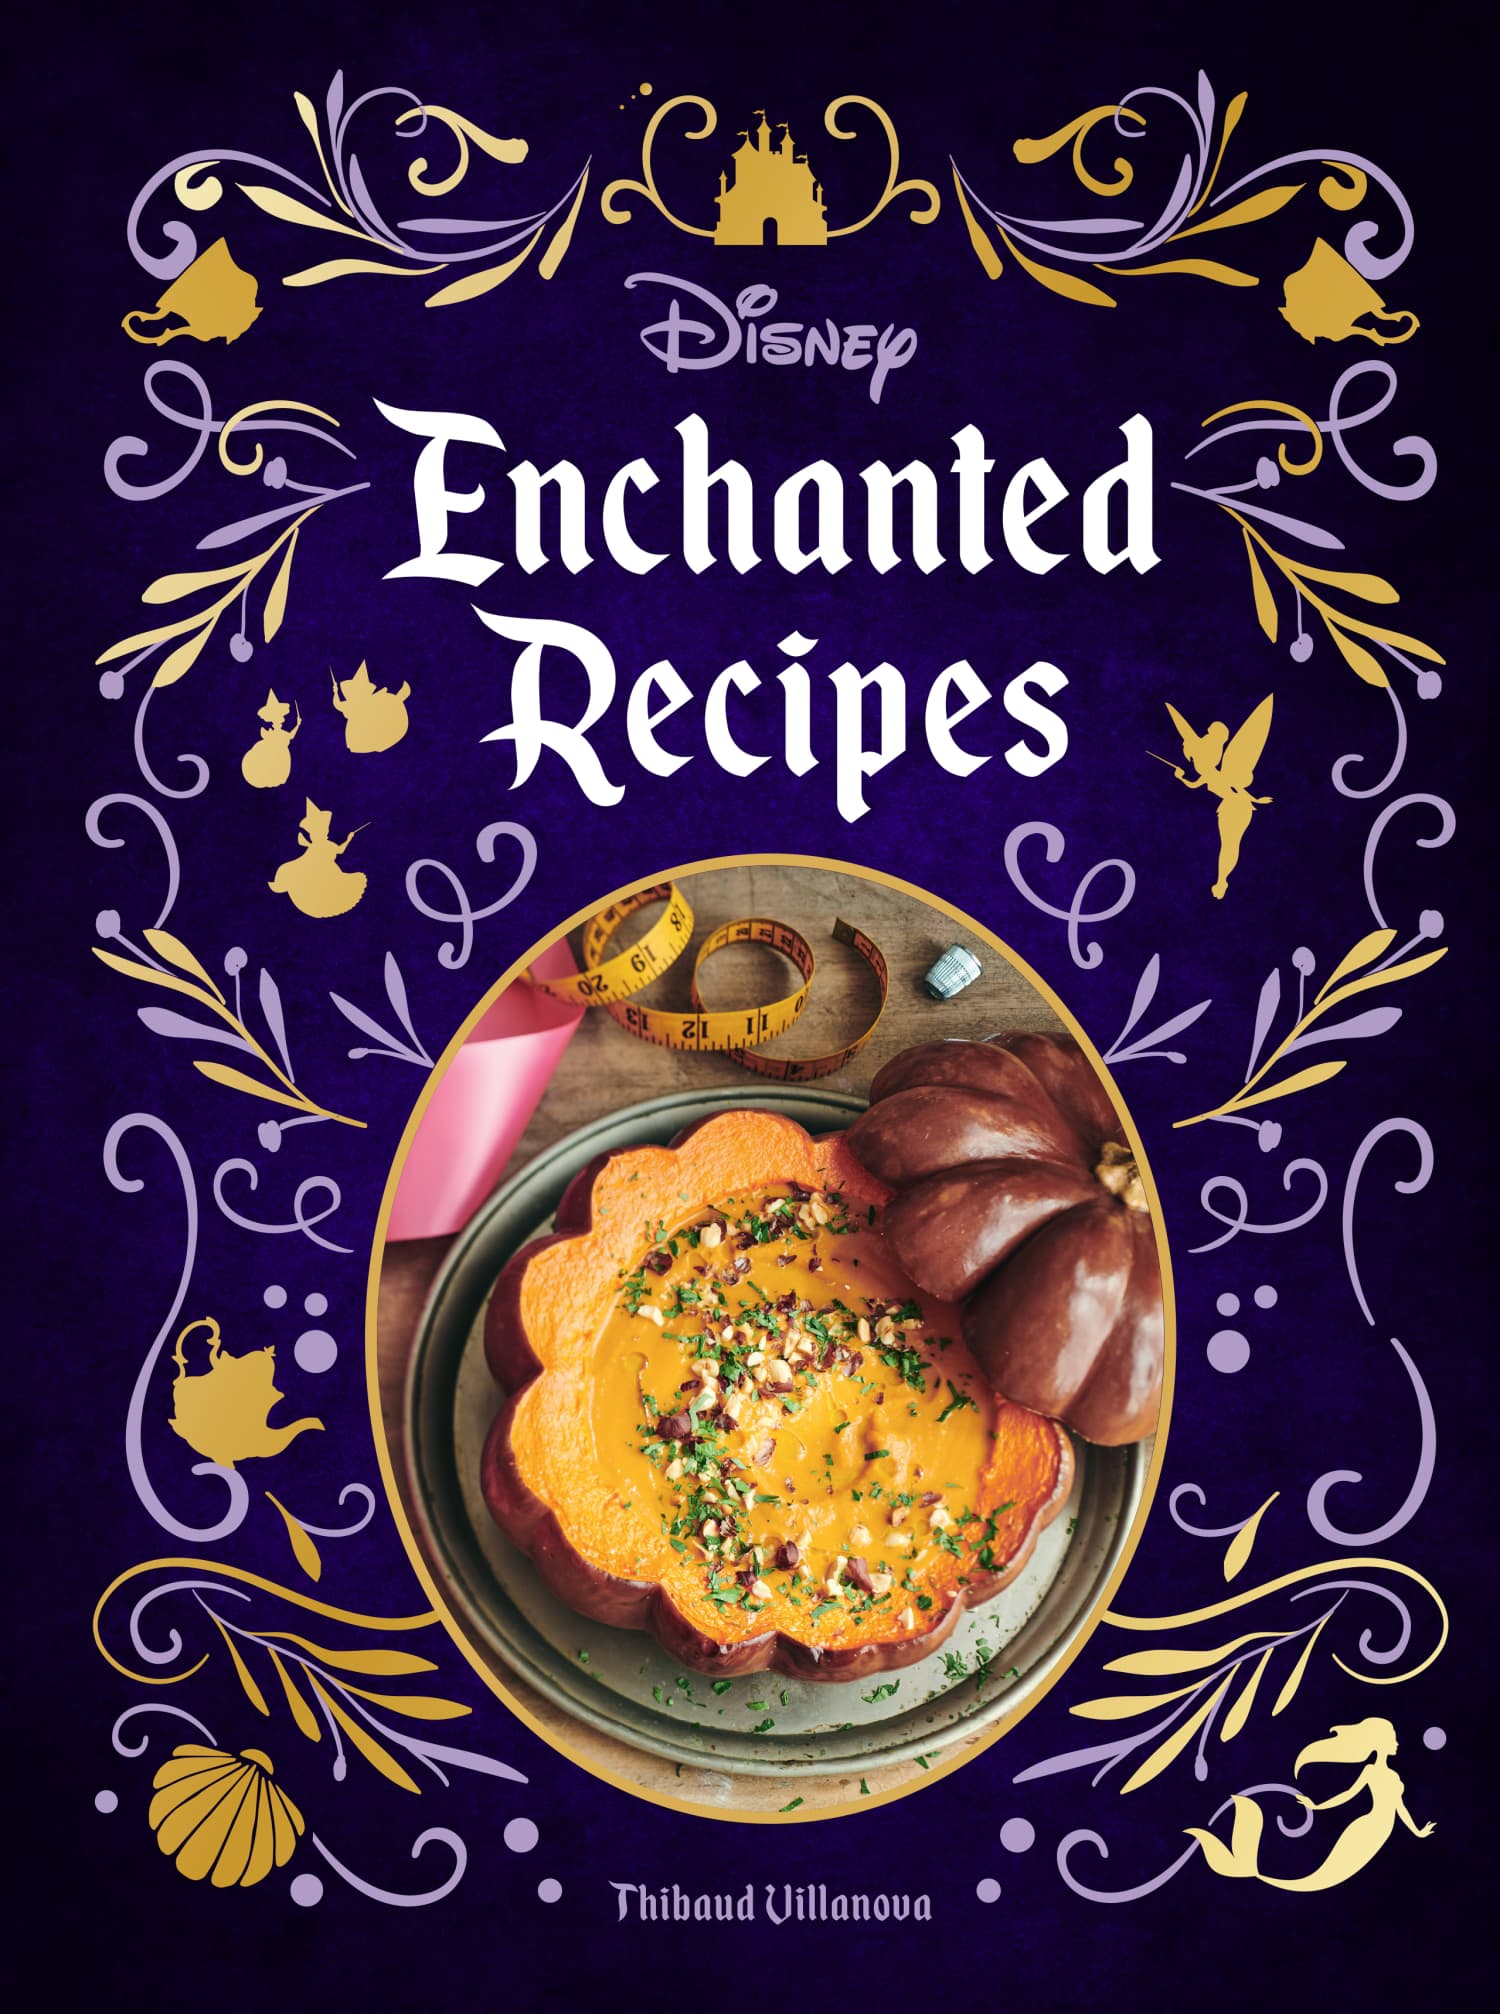 Bring the Magic Right to Your Kitchen with Disney’s New “Enchanted Recipes” Cookbook